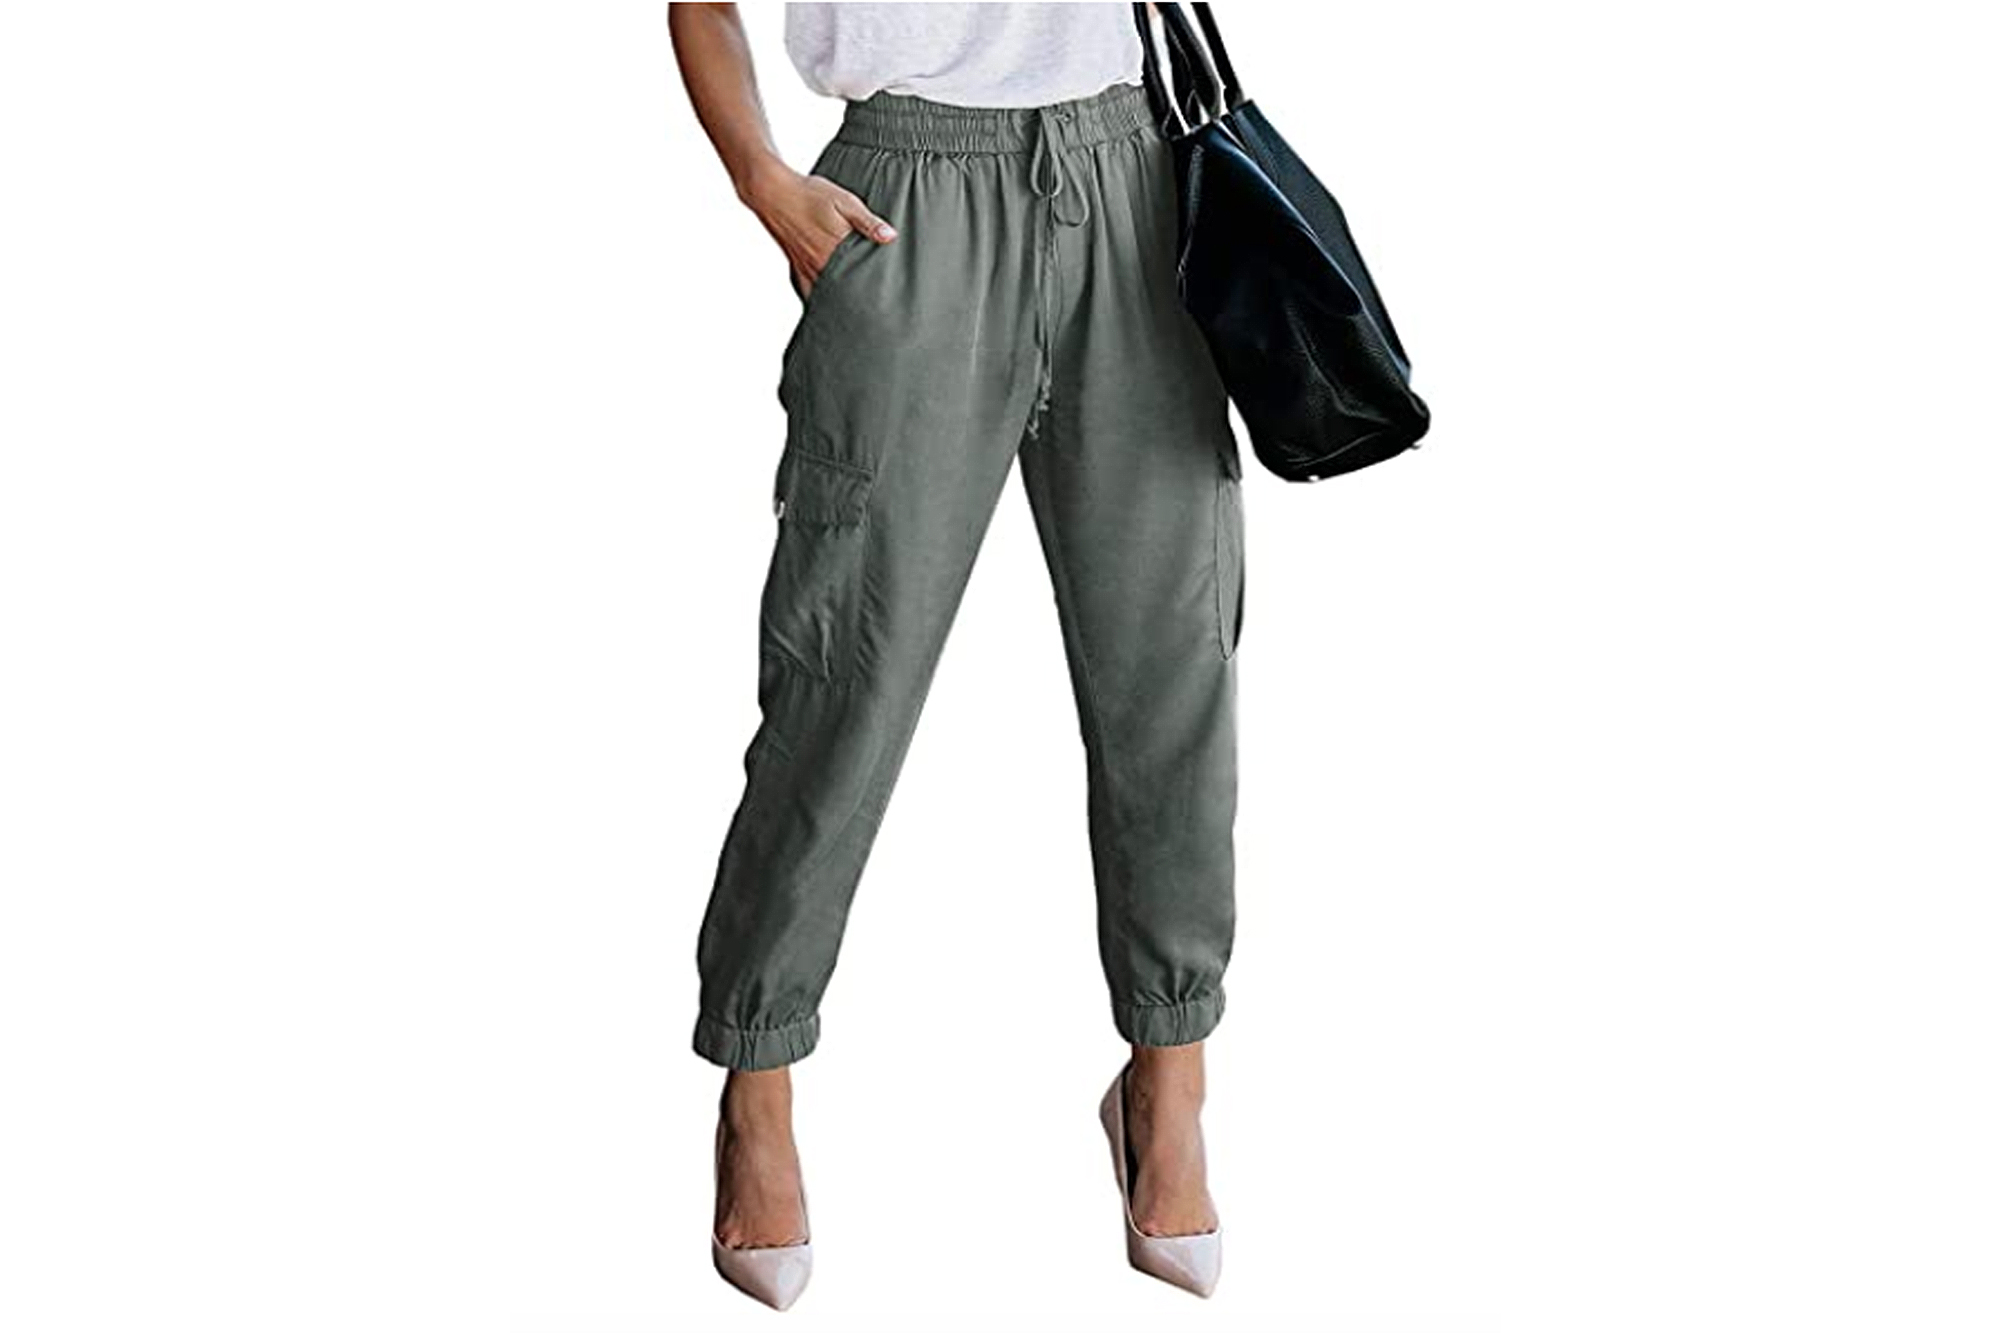 Introducing The Newest Trend in Casual Clothing: The Jogger Pants – Urban  Monkey®